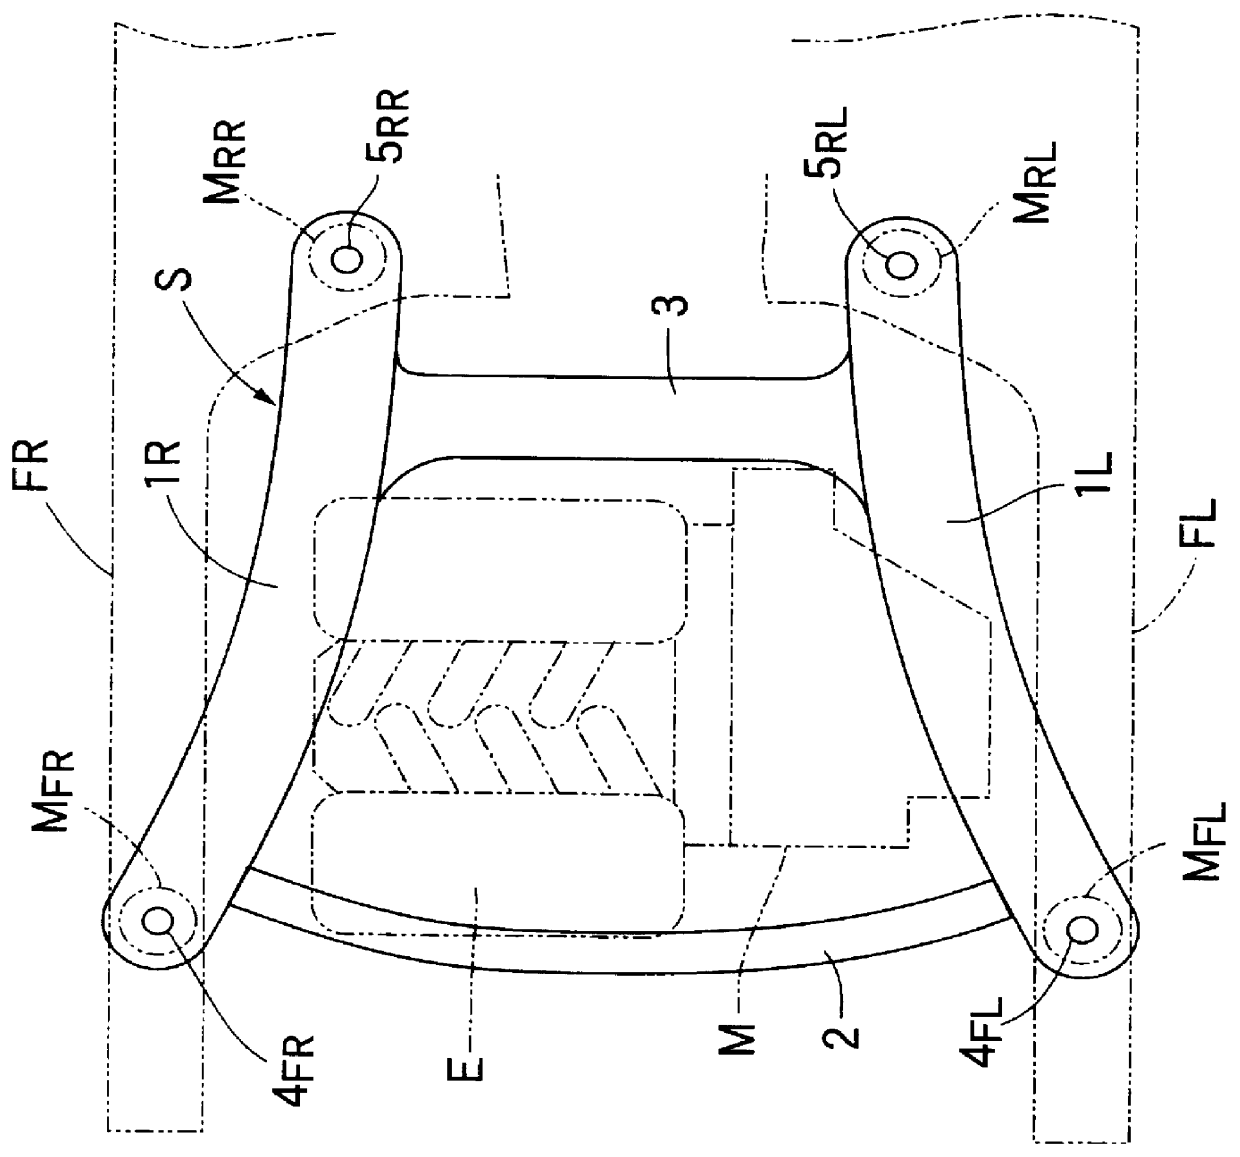 Shock absorbing vehicle body structure